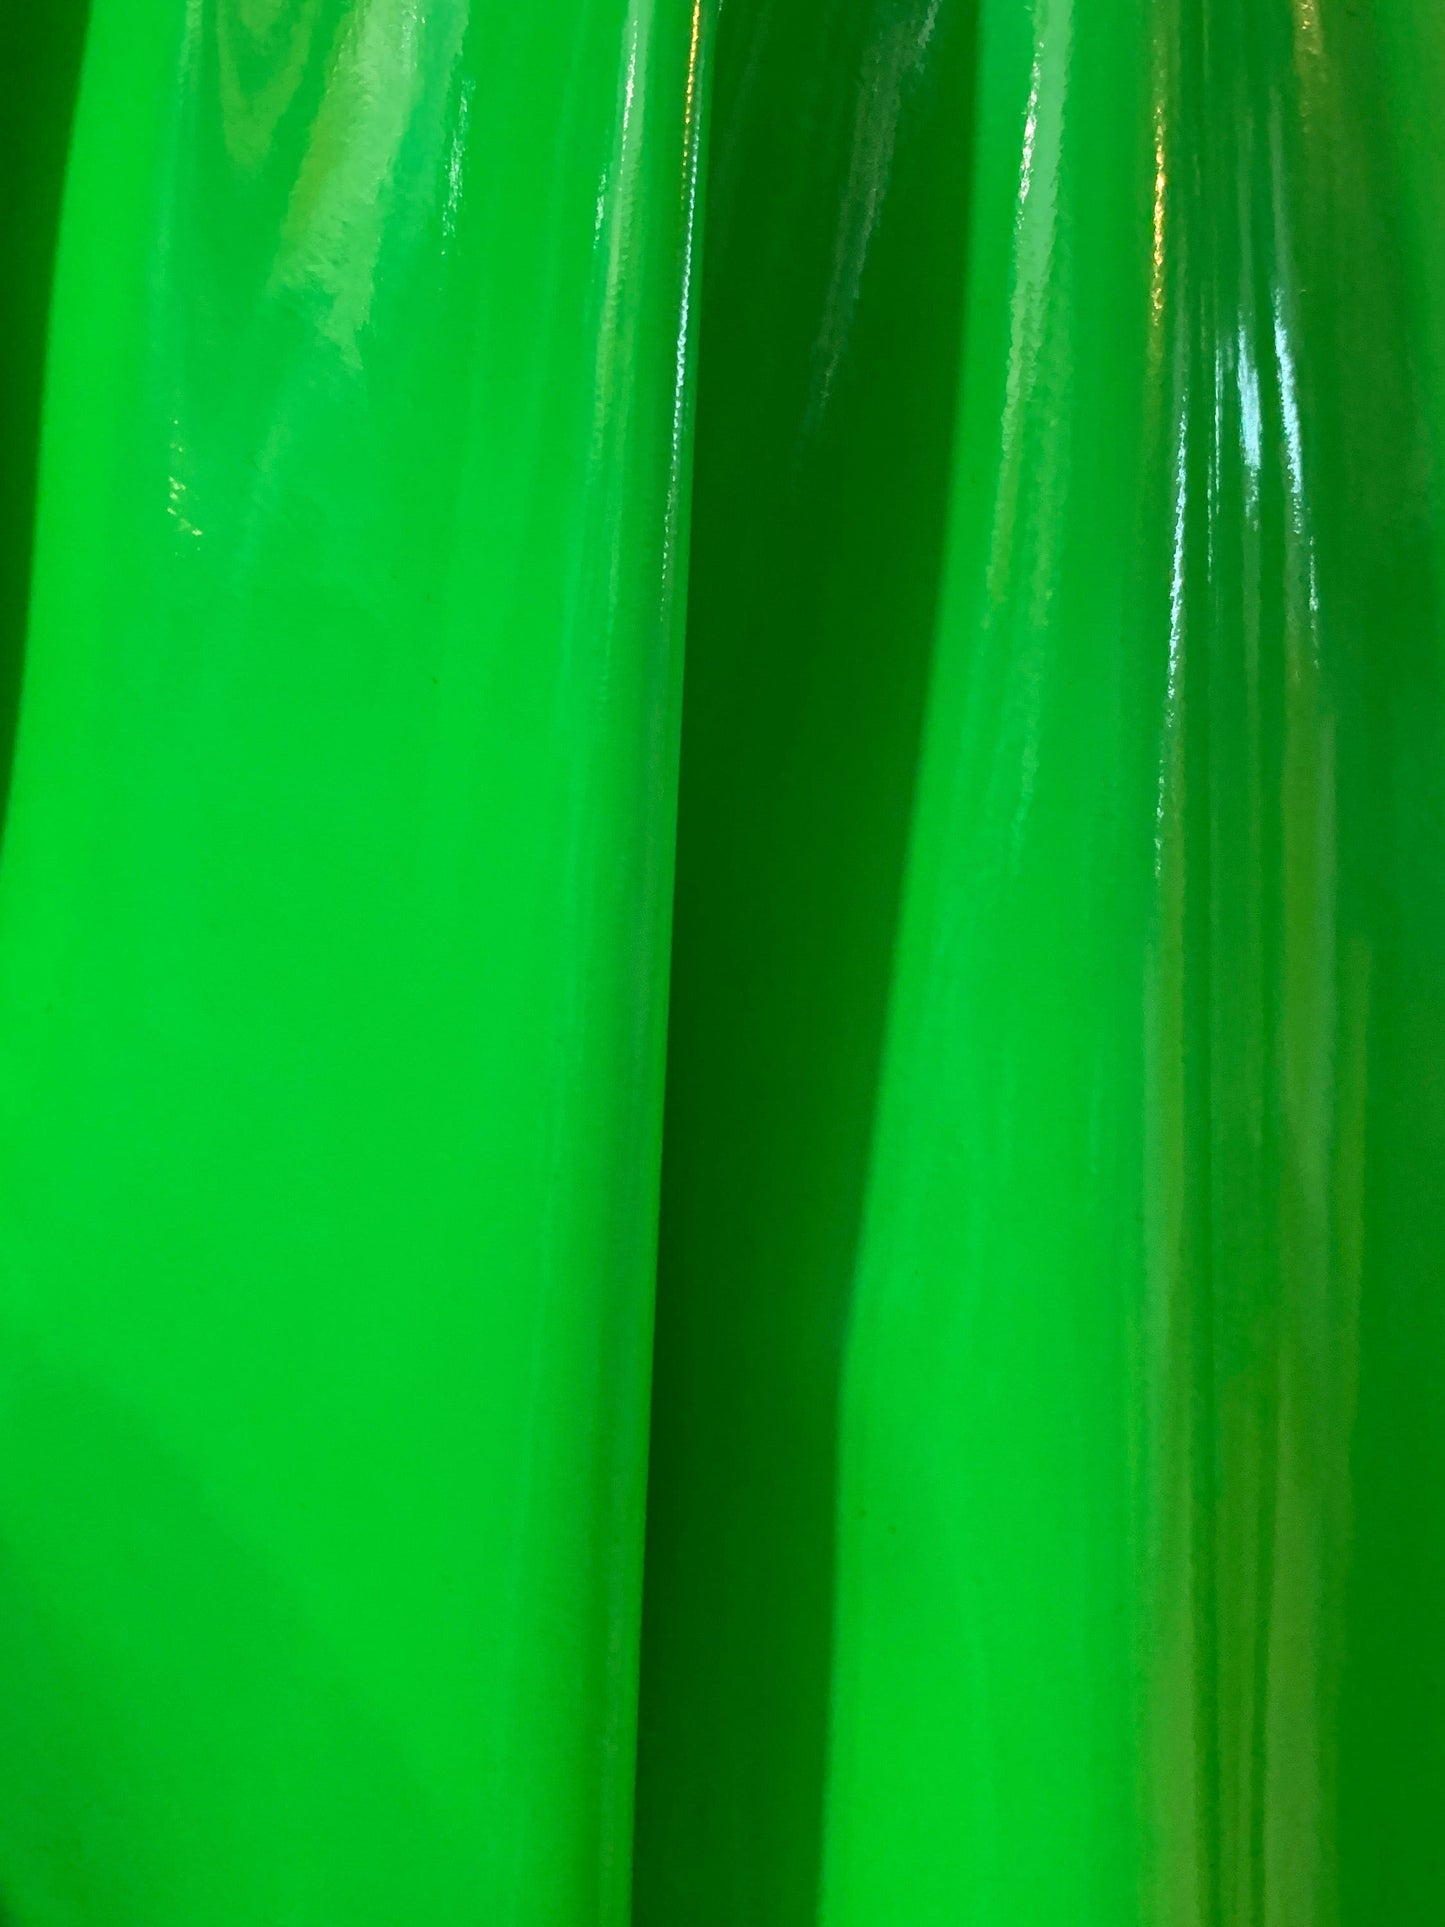 BRIGHT GREEN Shiny Glossy PVC Pleather Stretch Fabric (58 in.) Sold By The Yard